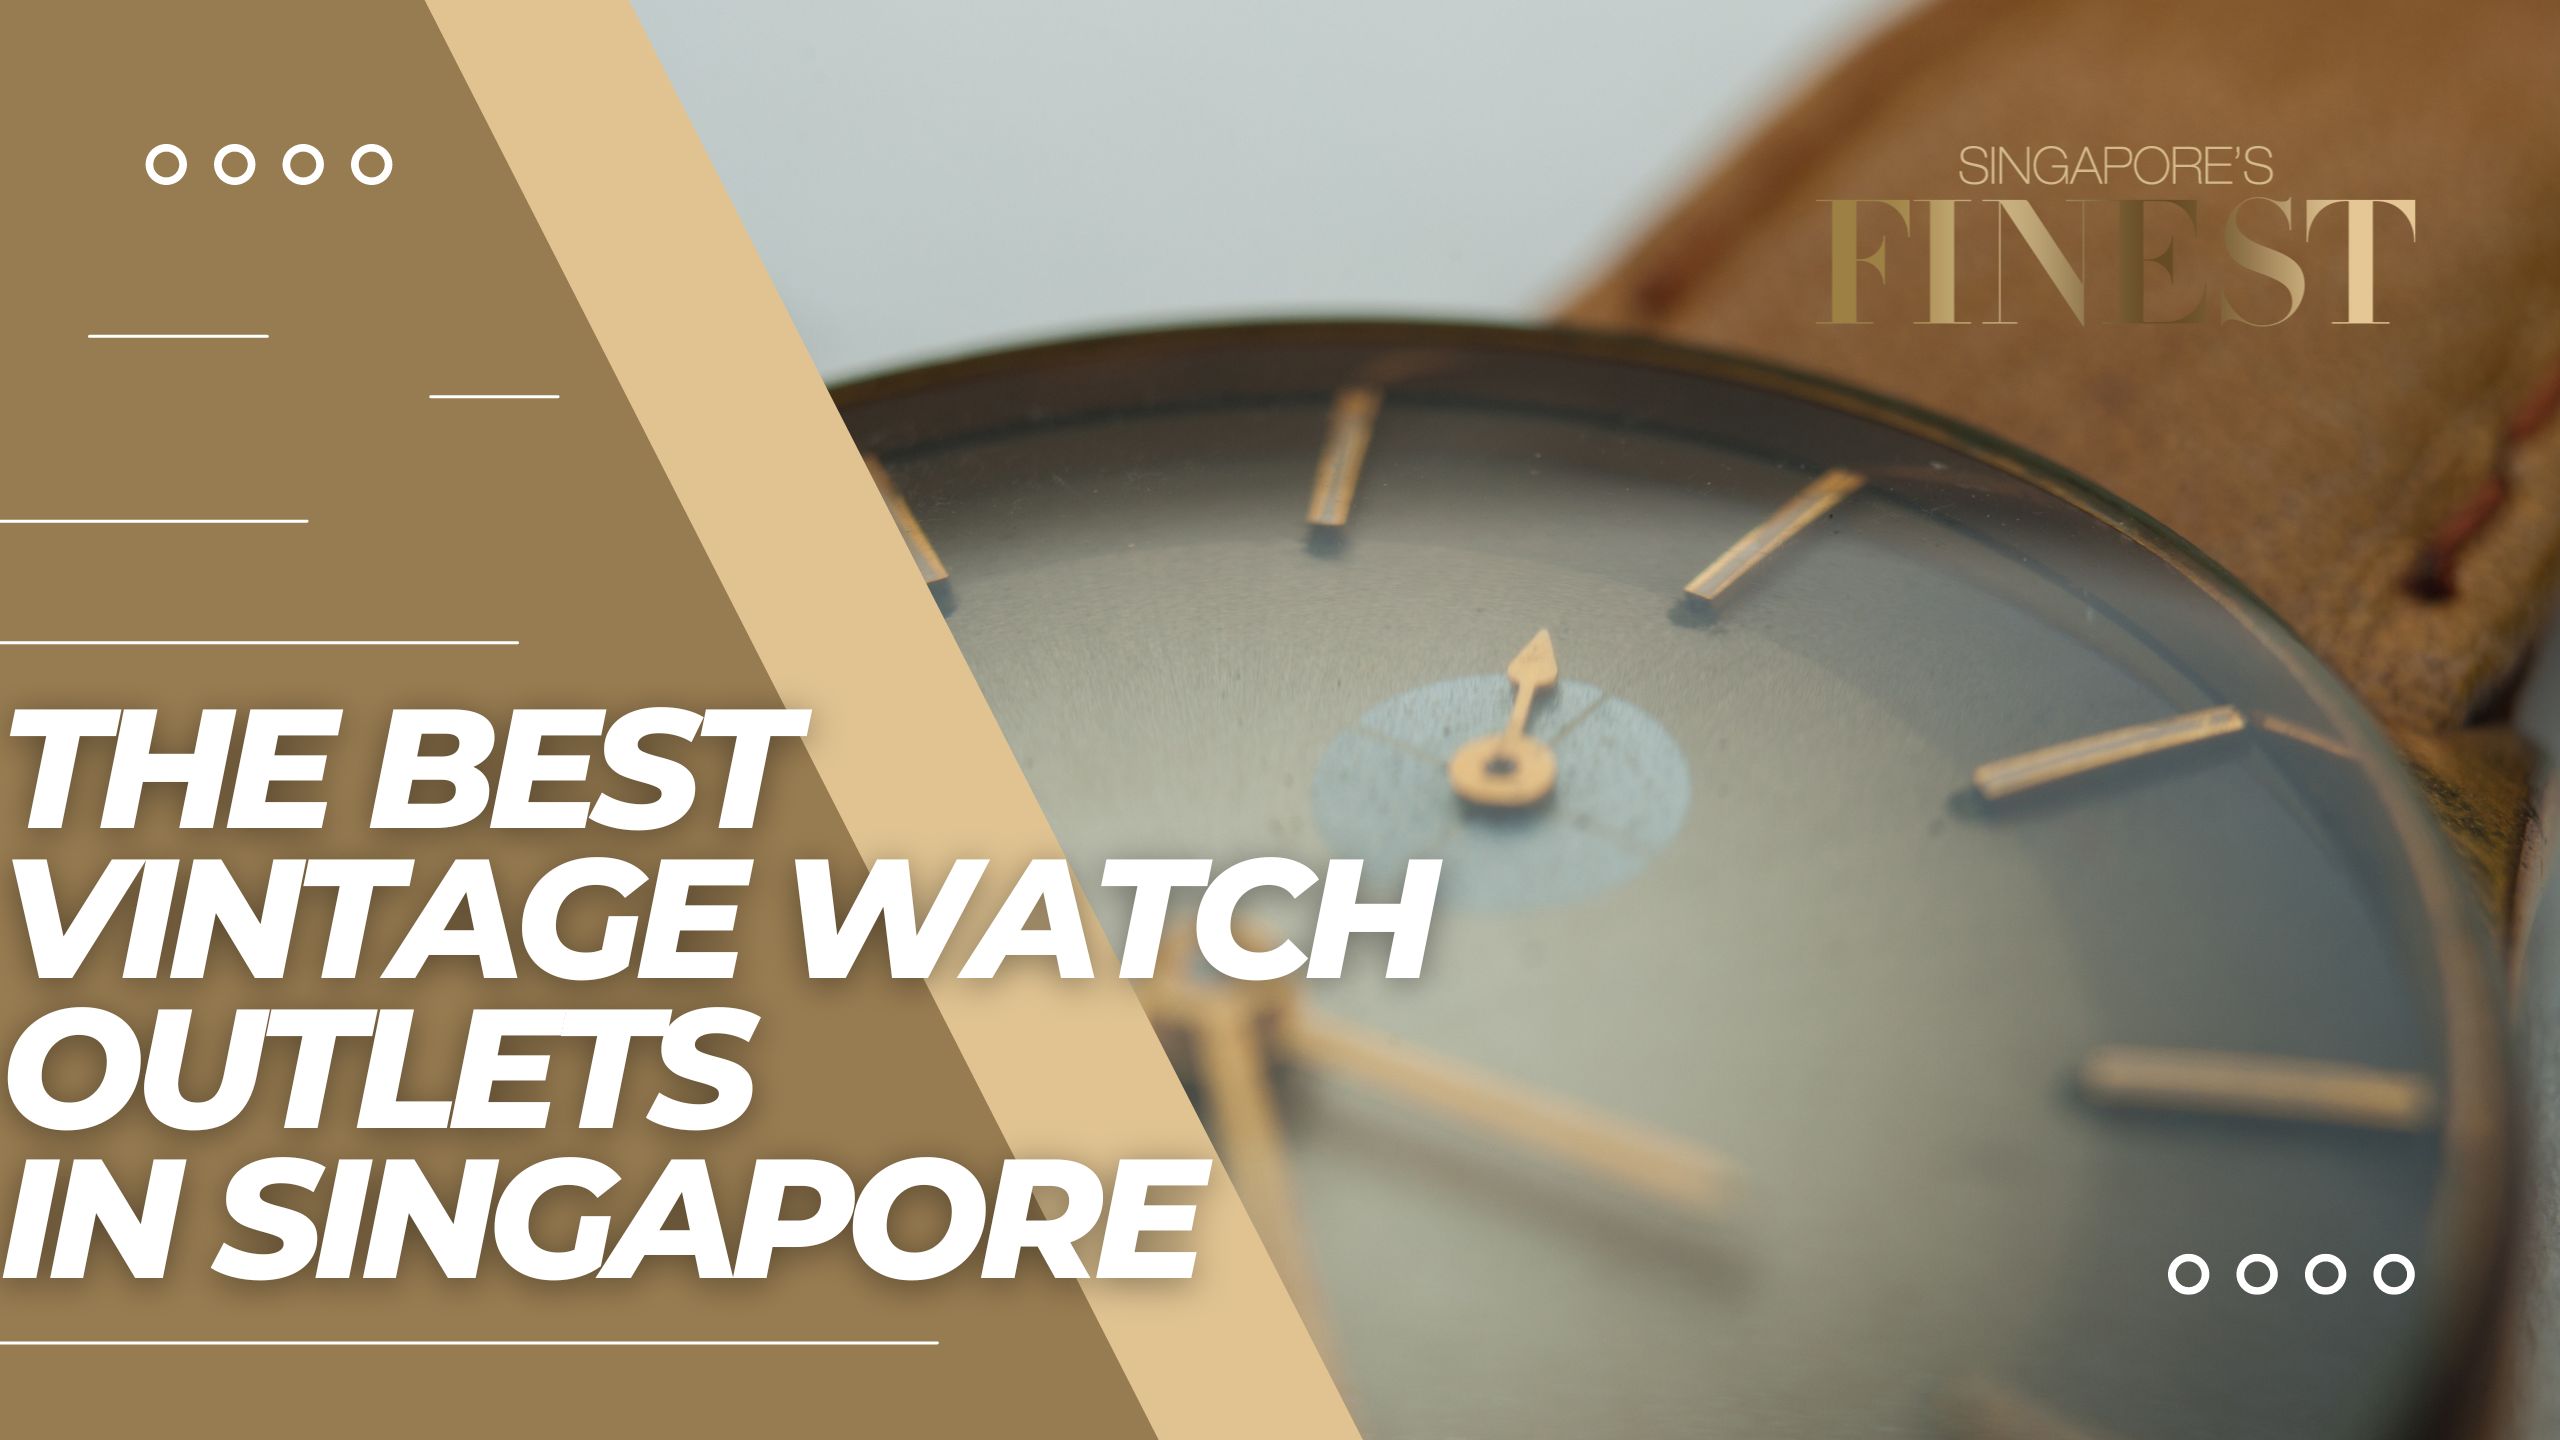 The Finest Vintage Watch Outlets in Singapore